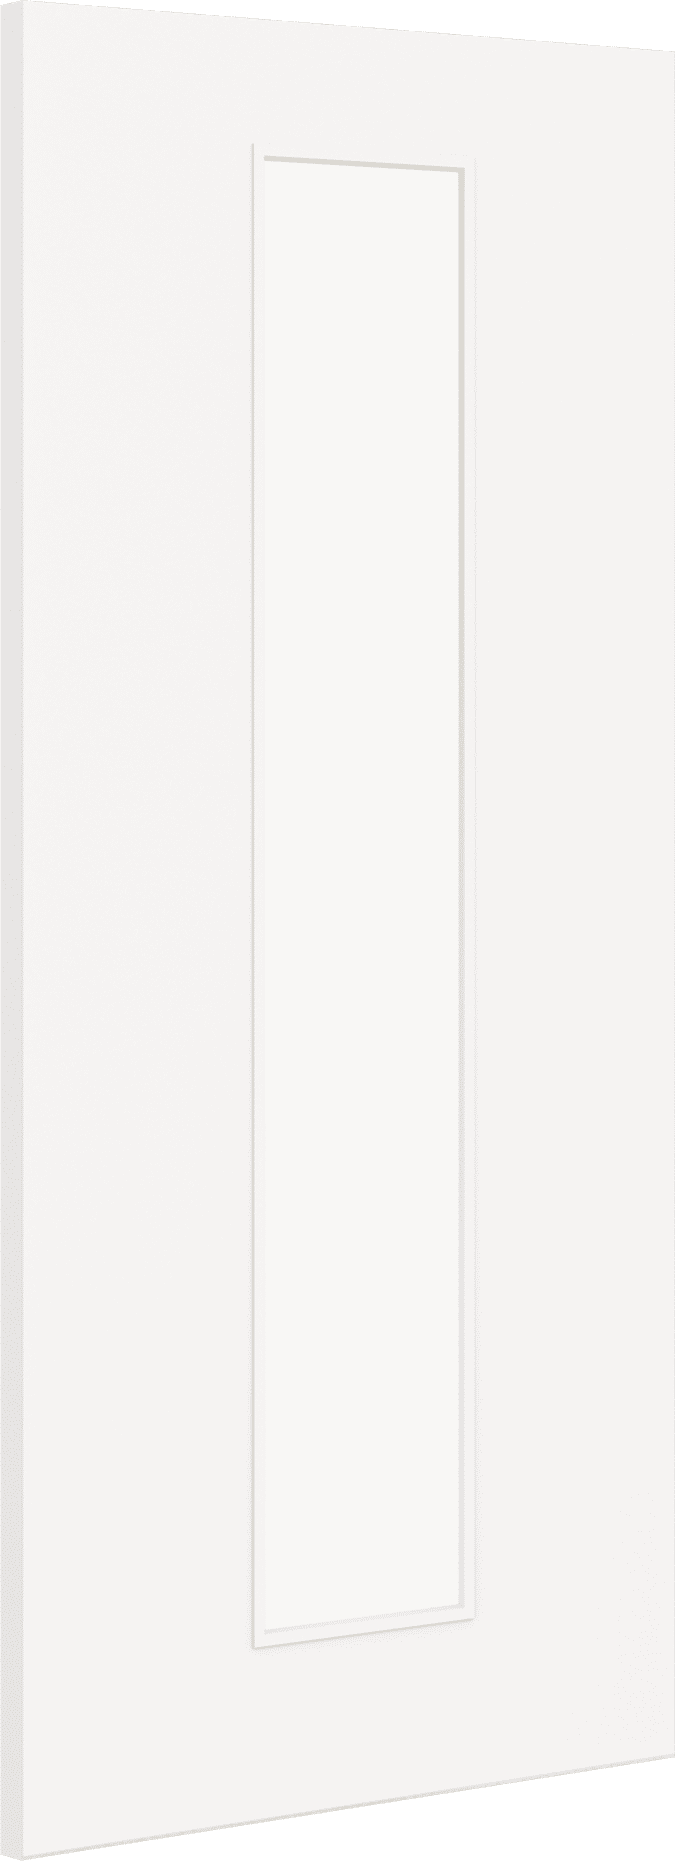 2040mm x 926mm x 44mm Architectural Paint Grade White 10 Clear Glazed Fire Door Blank